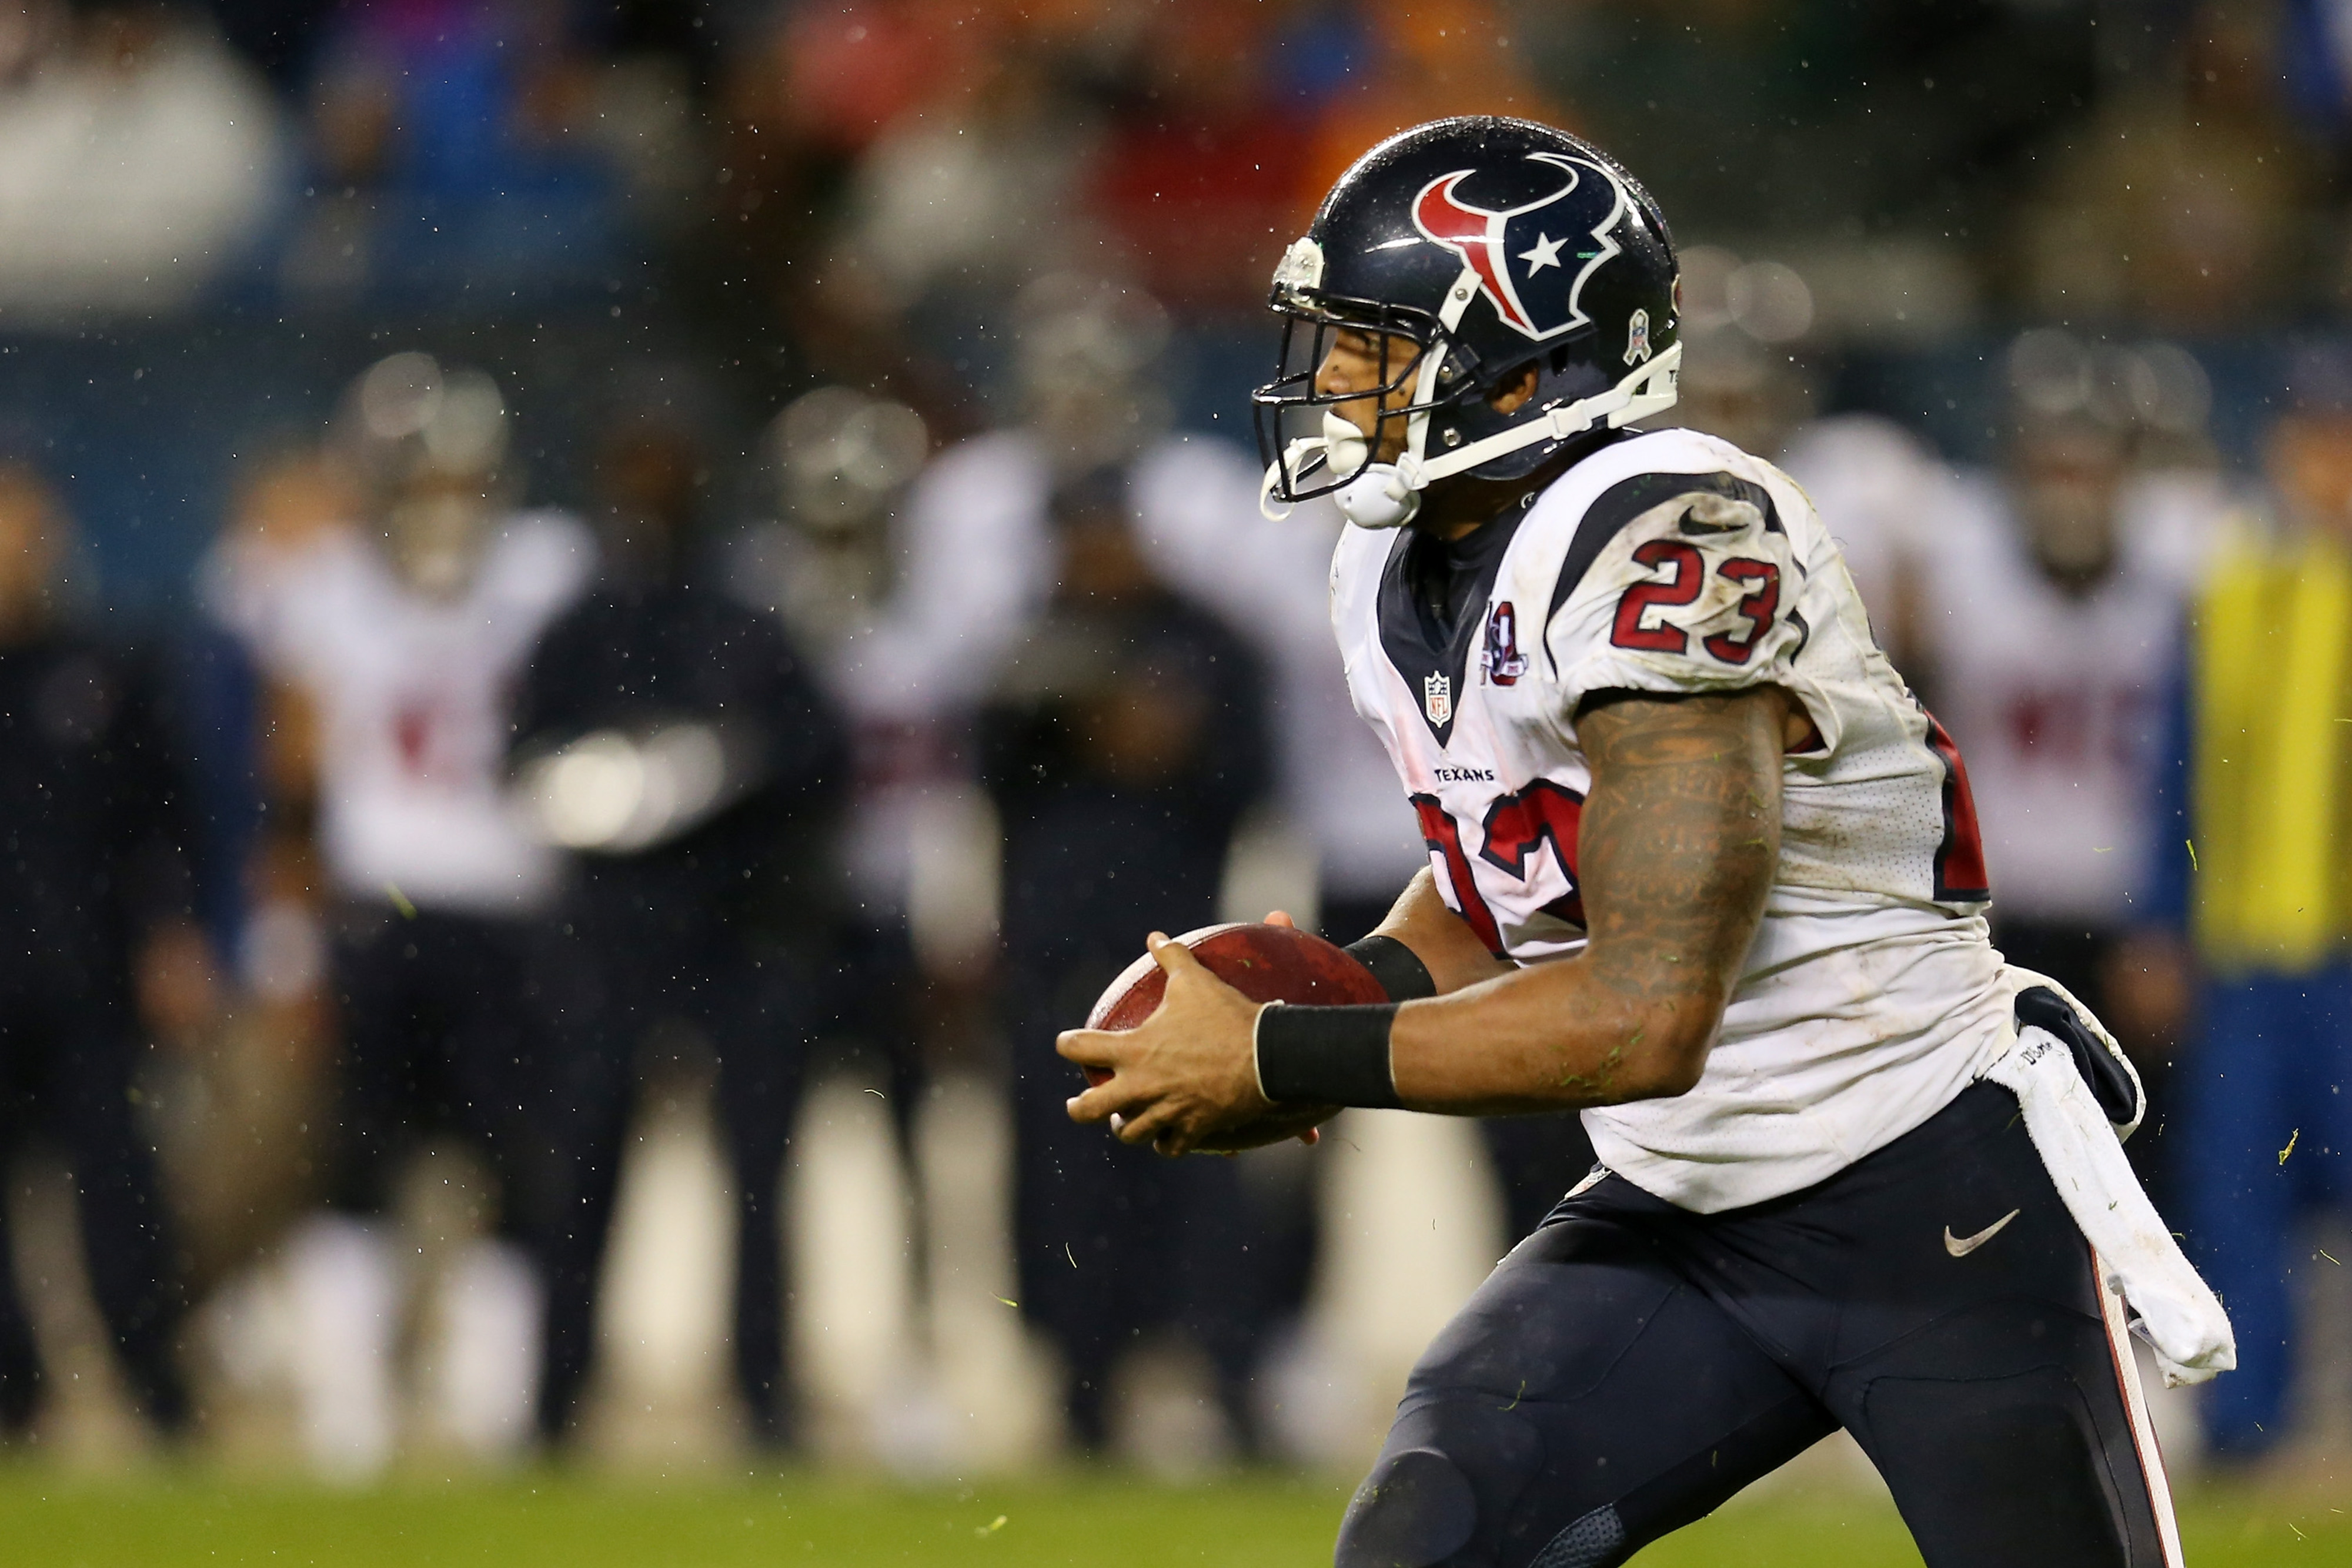 Arian Foster wonders why everyone is talking about the weather.